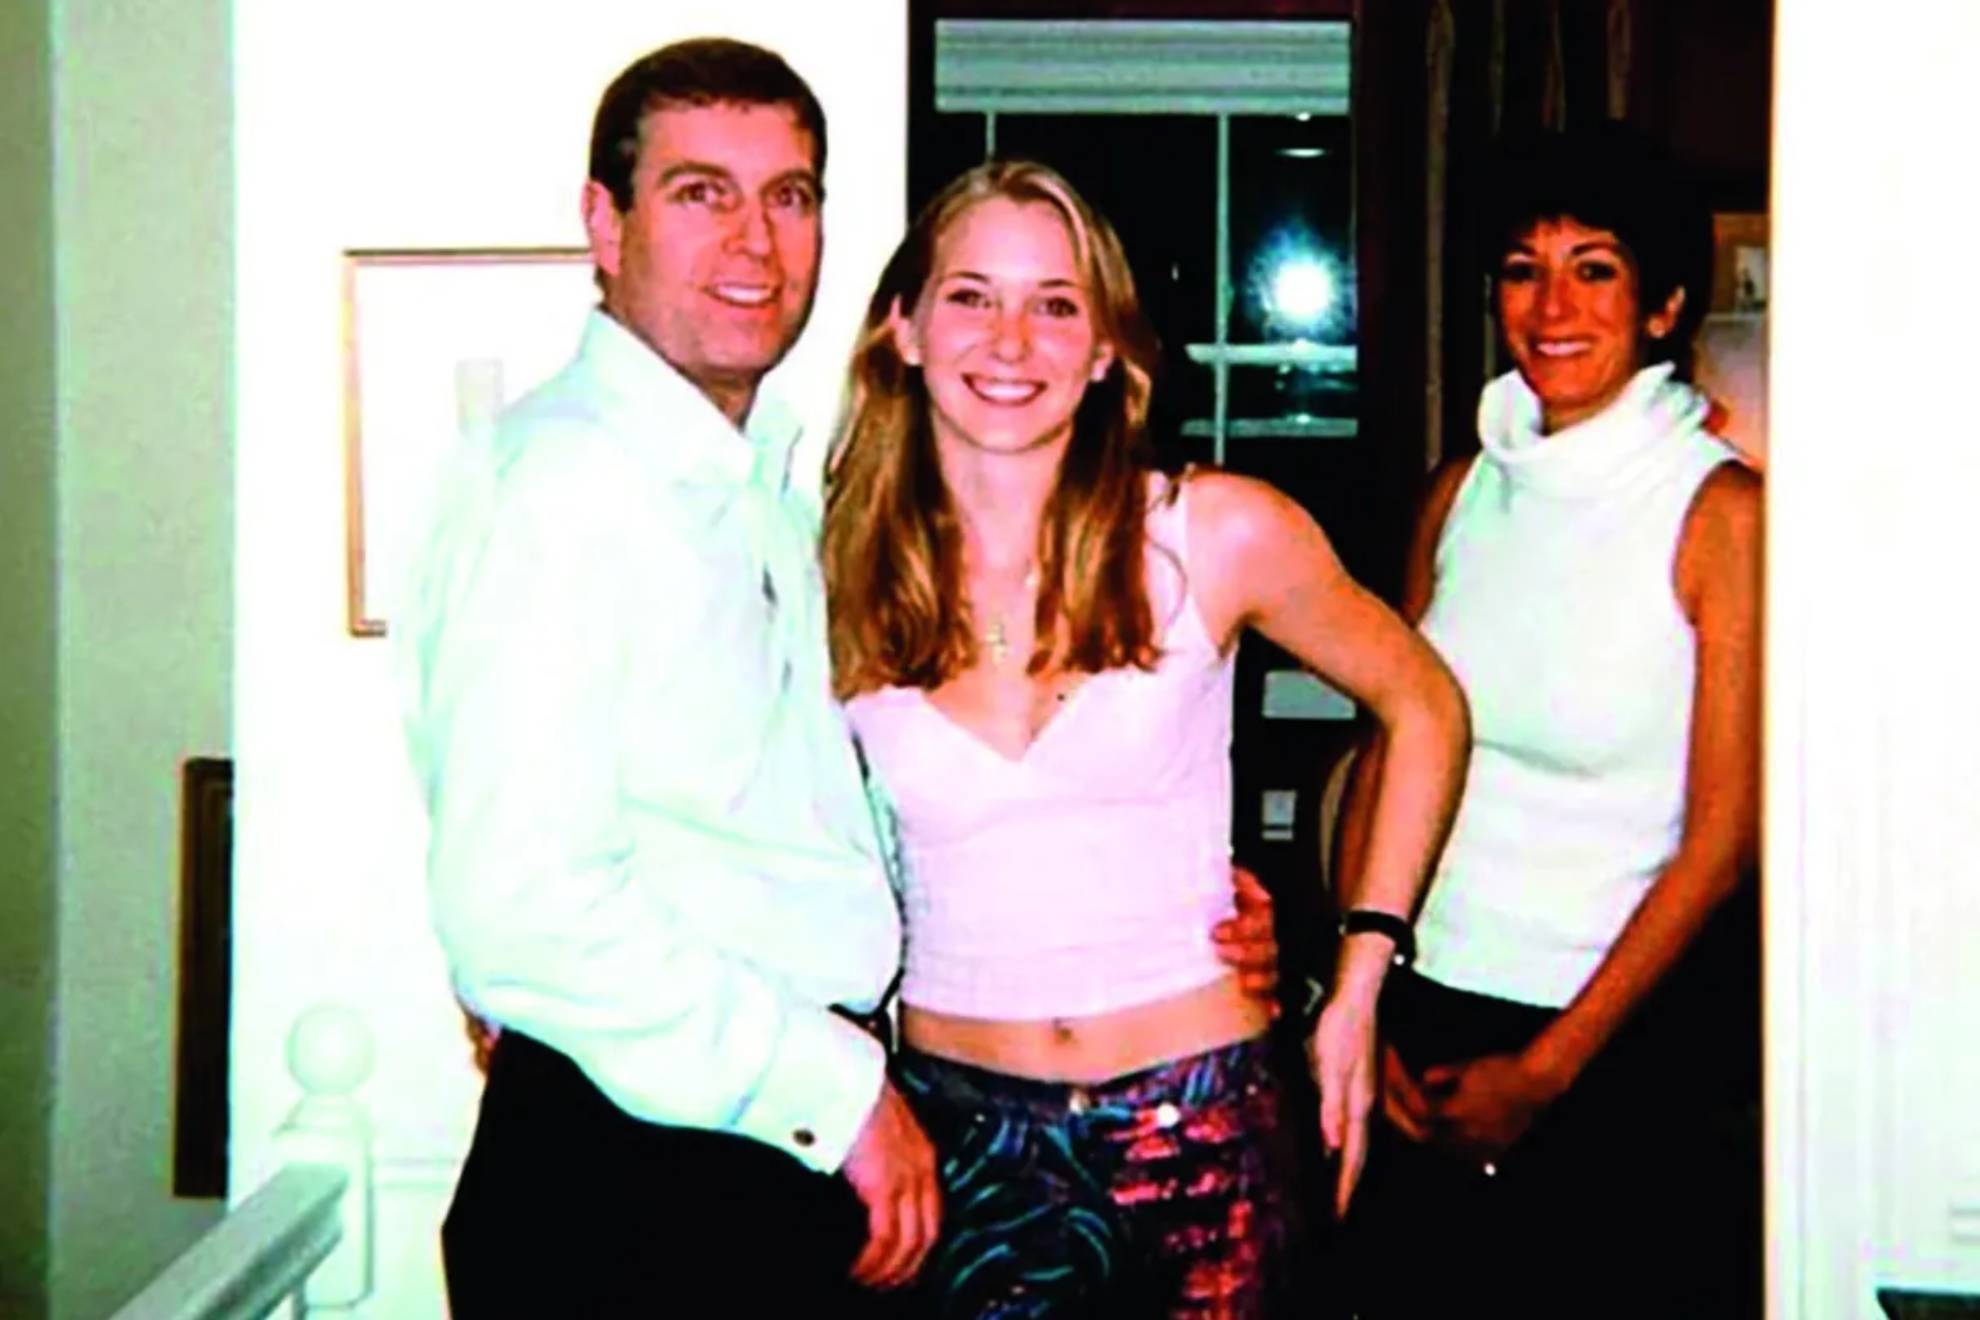 Epstein said to have paid Virginia Giuffre to have sex with Prince Andrew when she was 17 years old